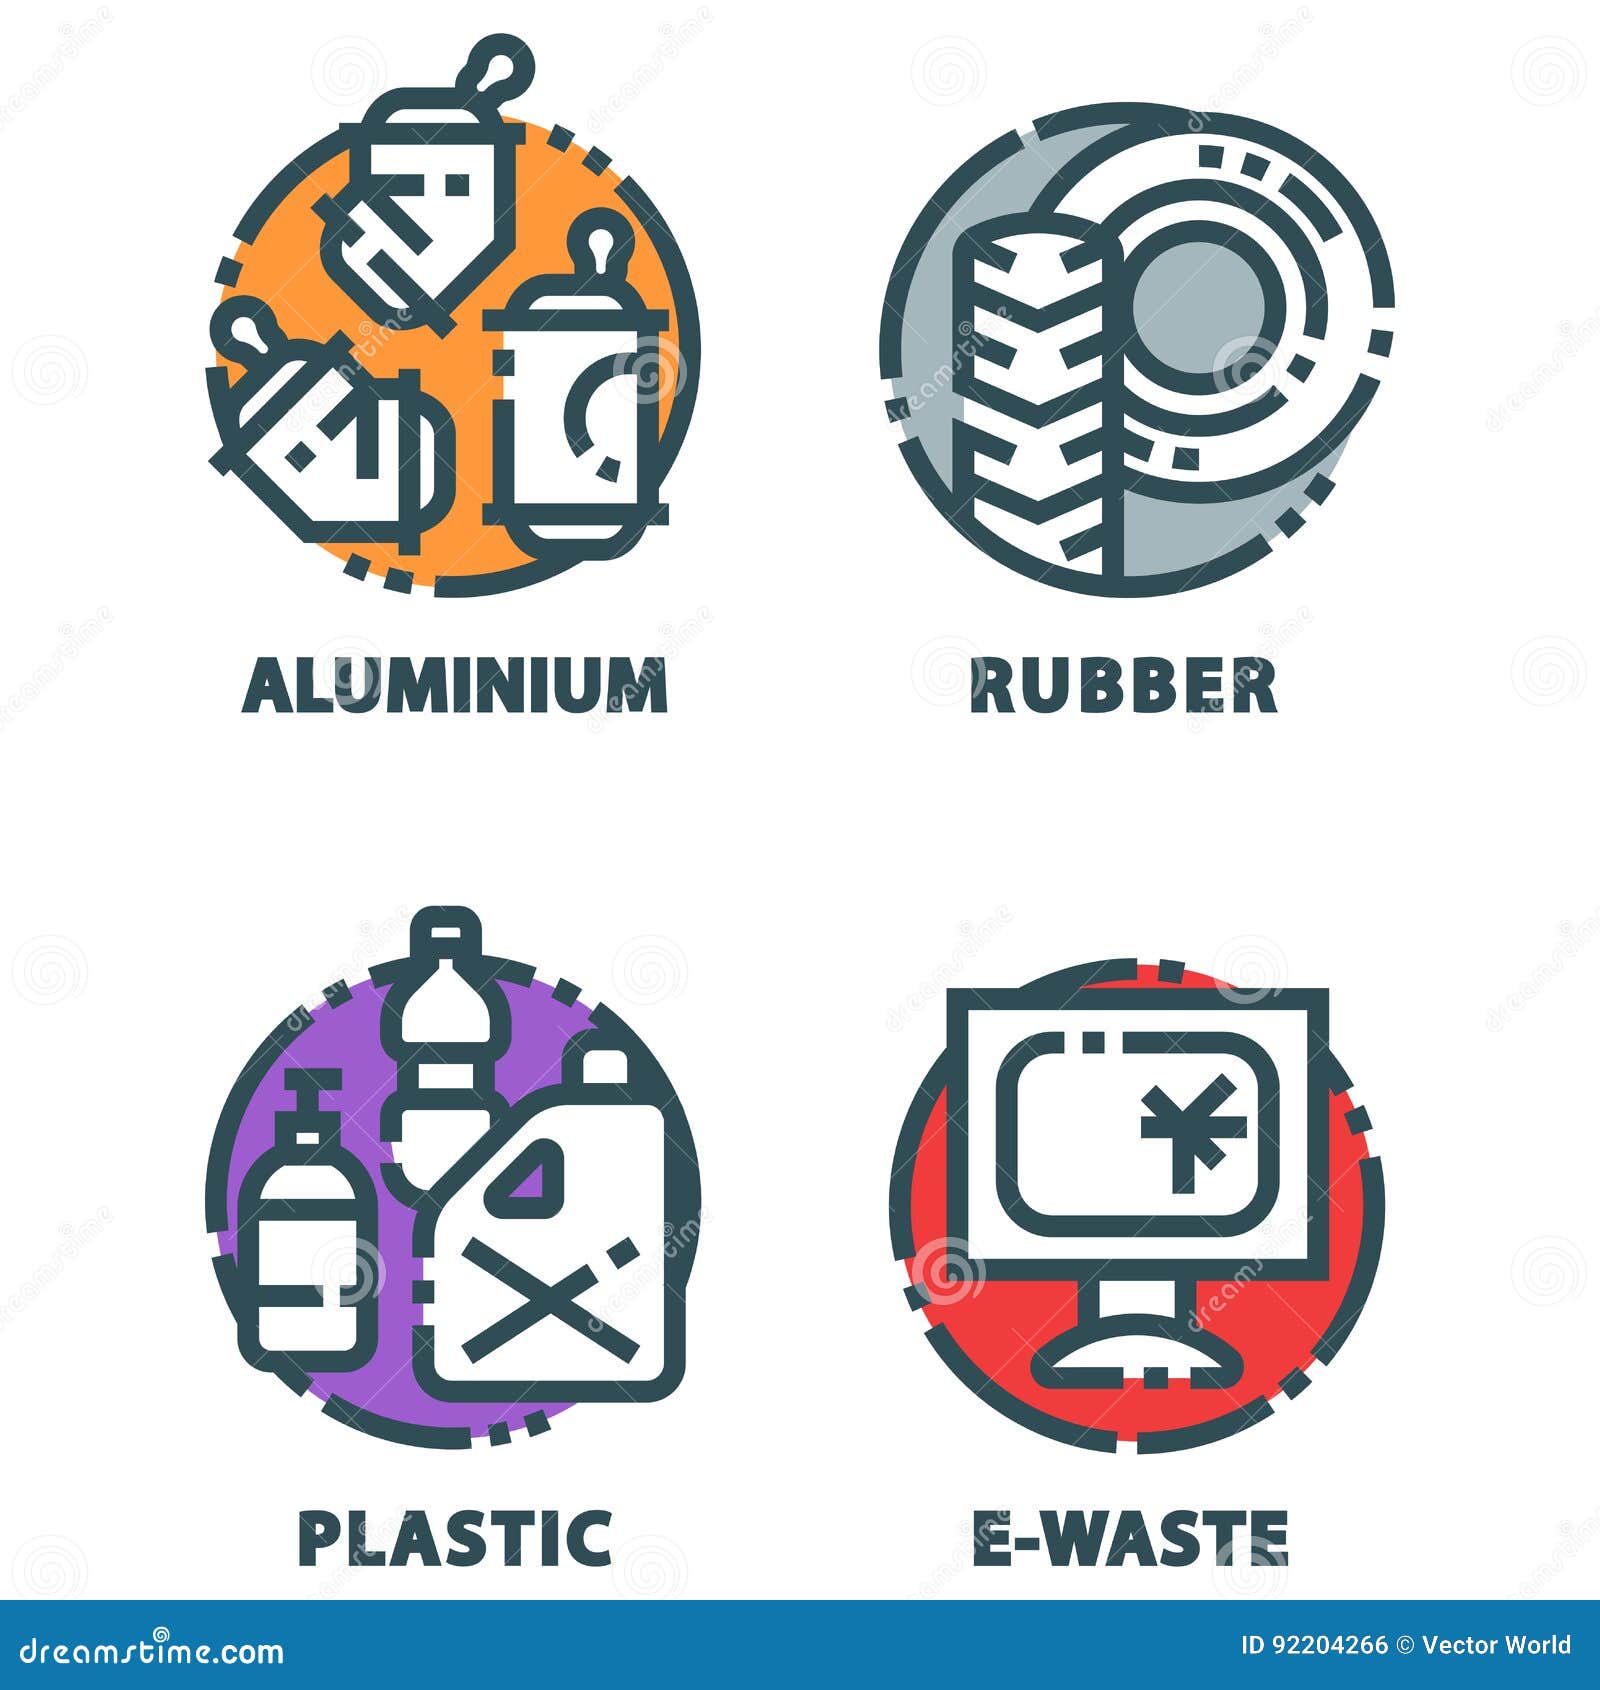 https://thumbs.dreamstime.com/z/recycling-garbage-elements-trash-bags-tires-management-industry-utilize-waste-can-vector-illustration-concept-ecology-bottle-92204266.jpg